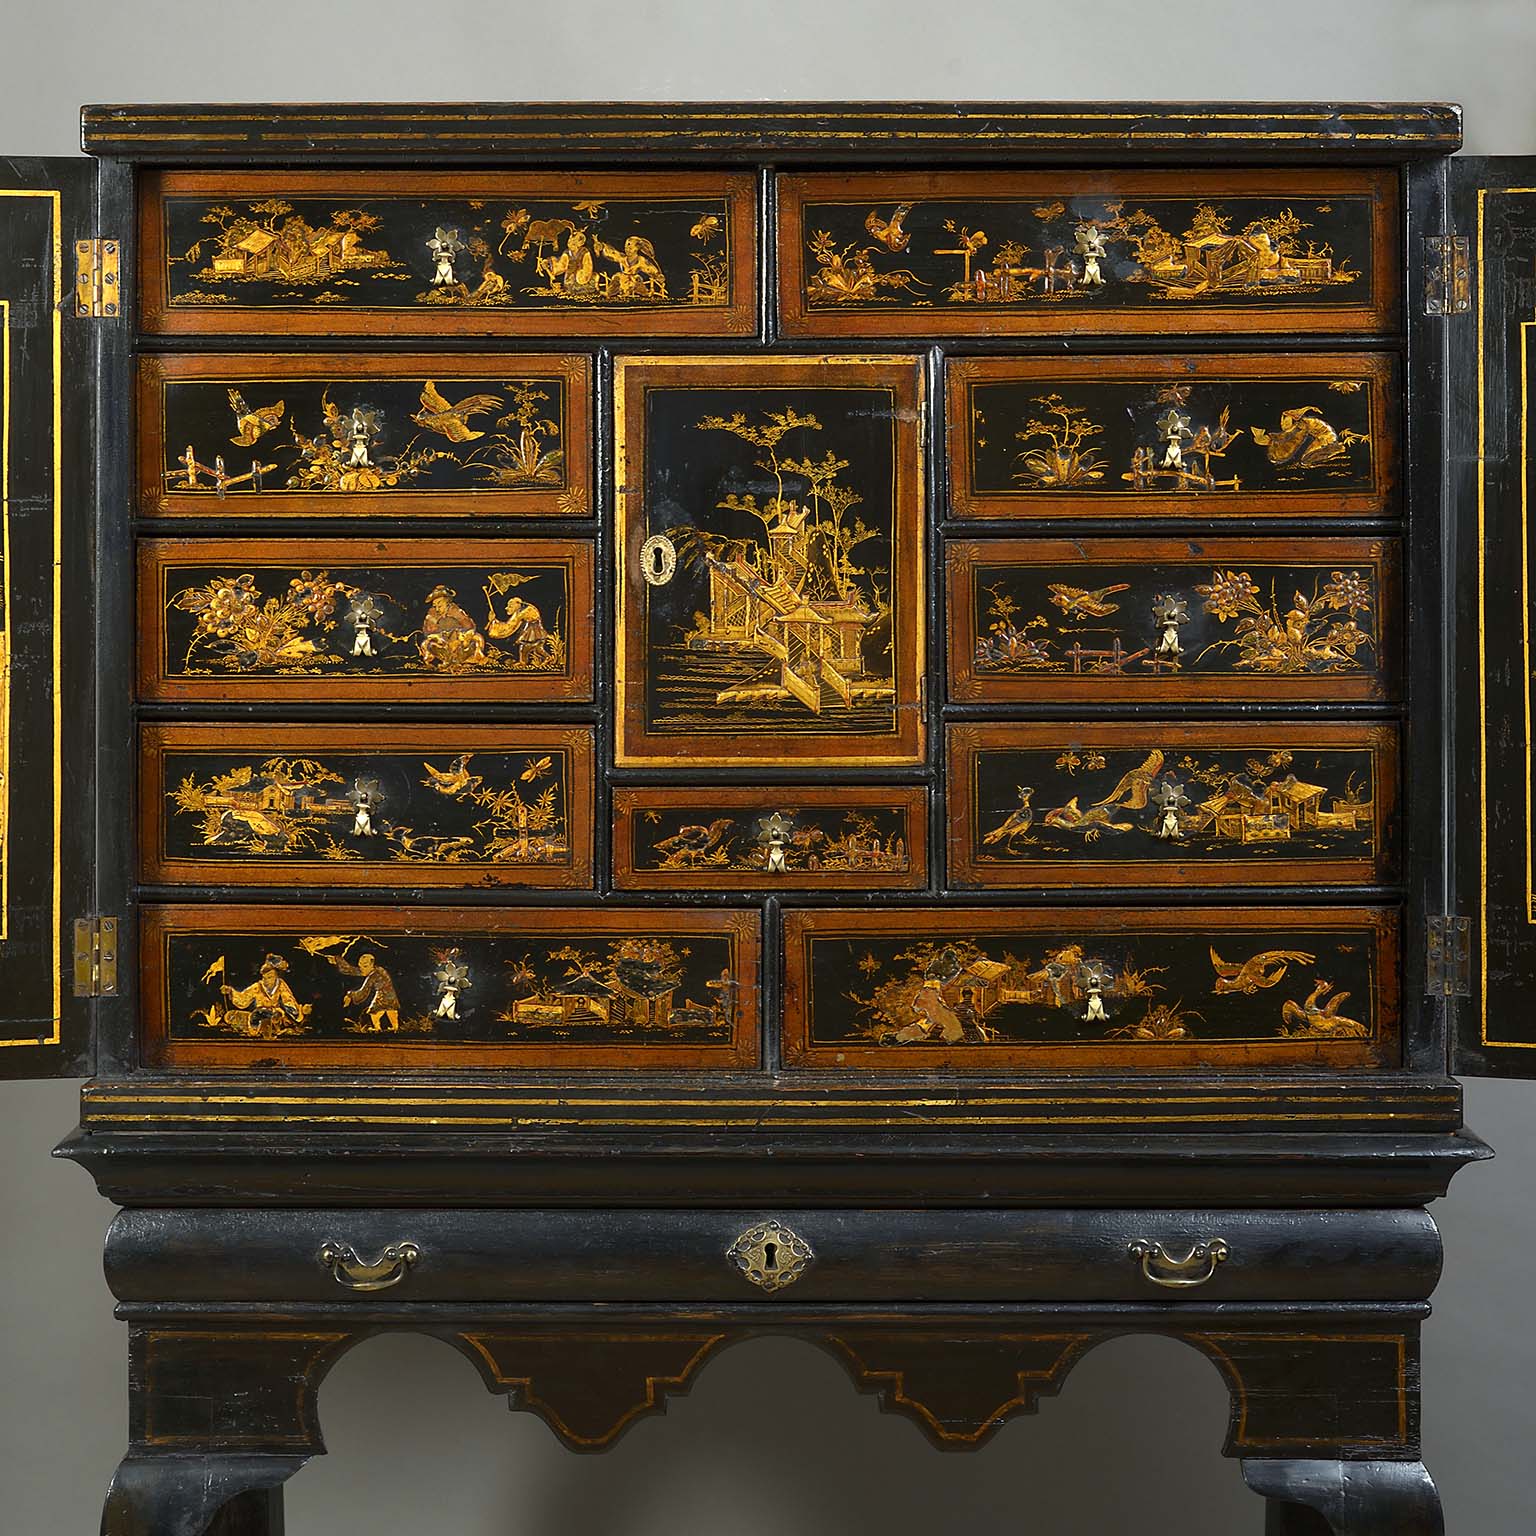 Chinoiserie Lacquer Cabinet on Stand